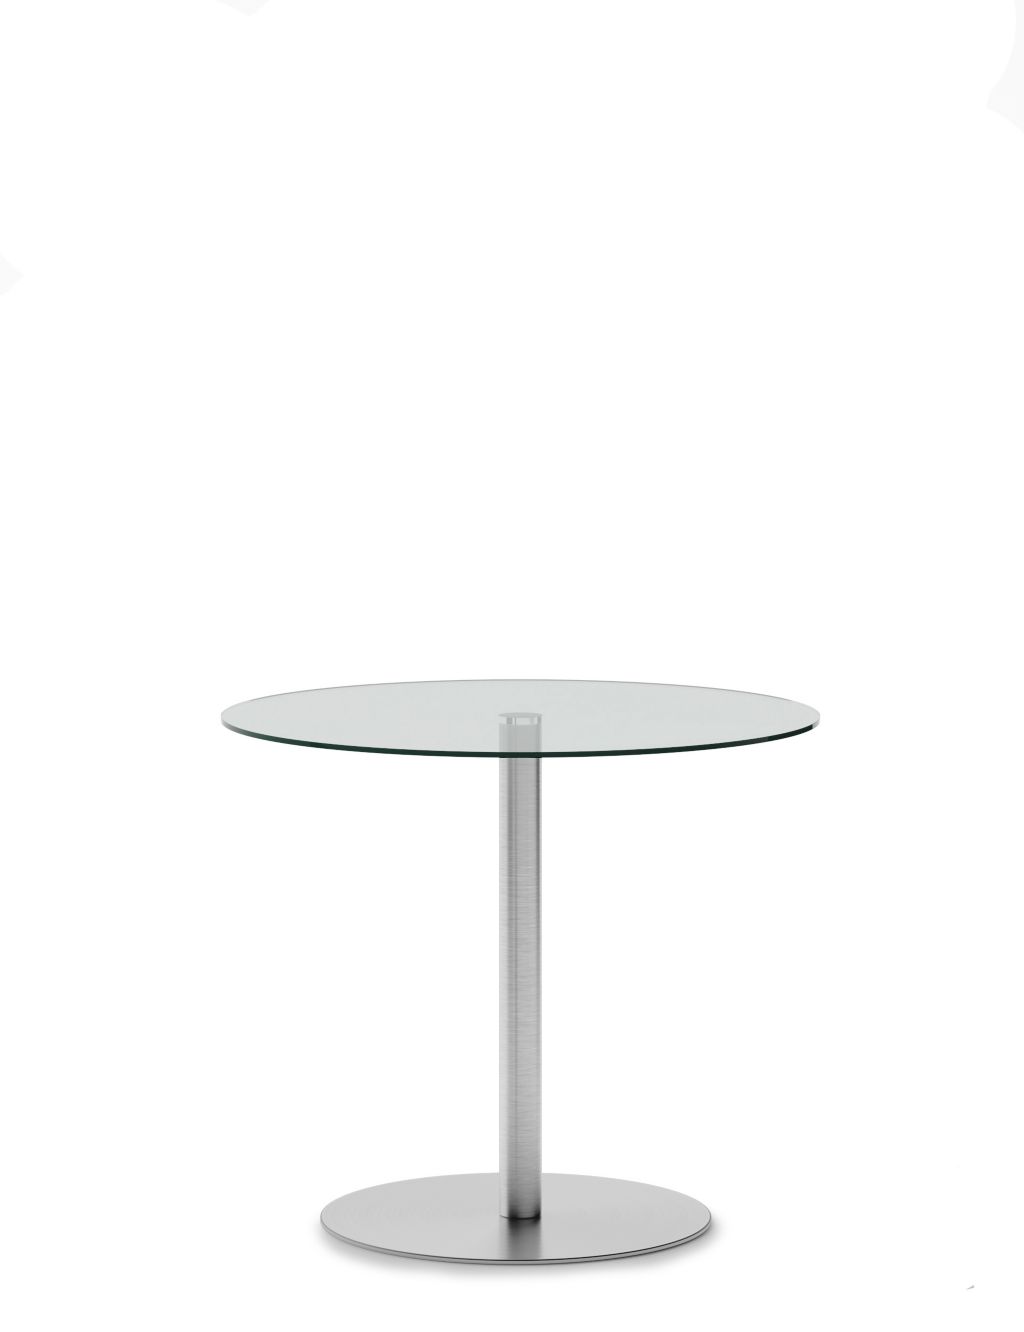 Huxley 4 Seater Pedestal Dining Table 1 of 8